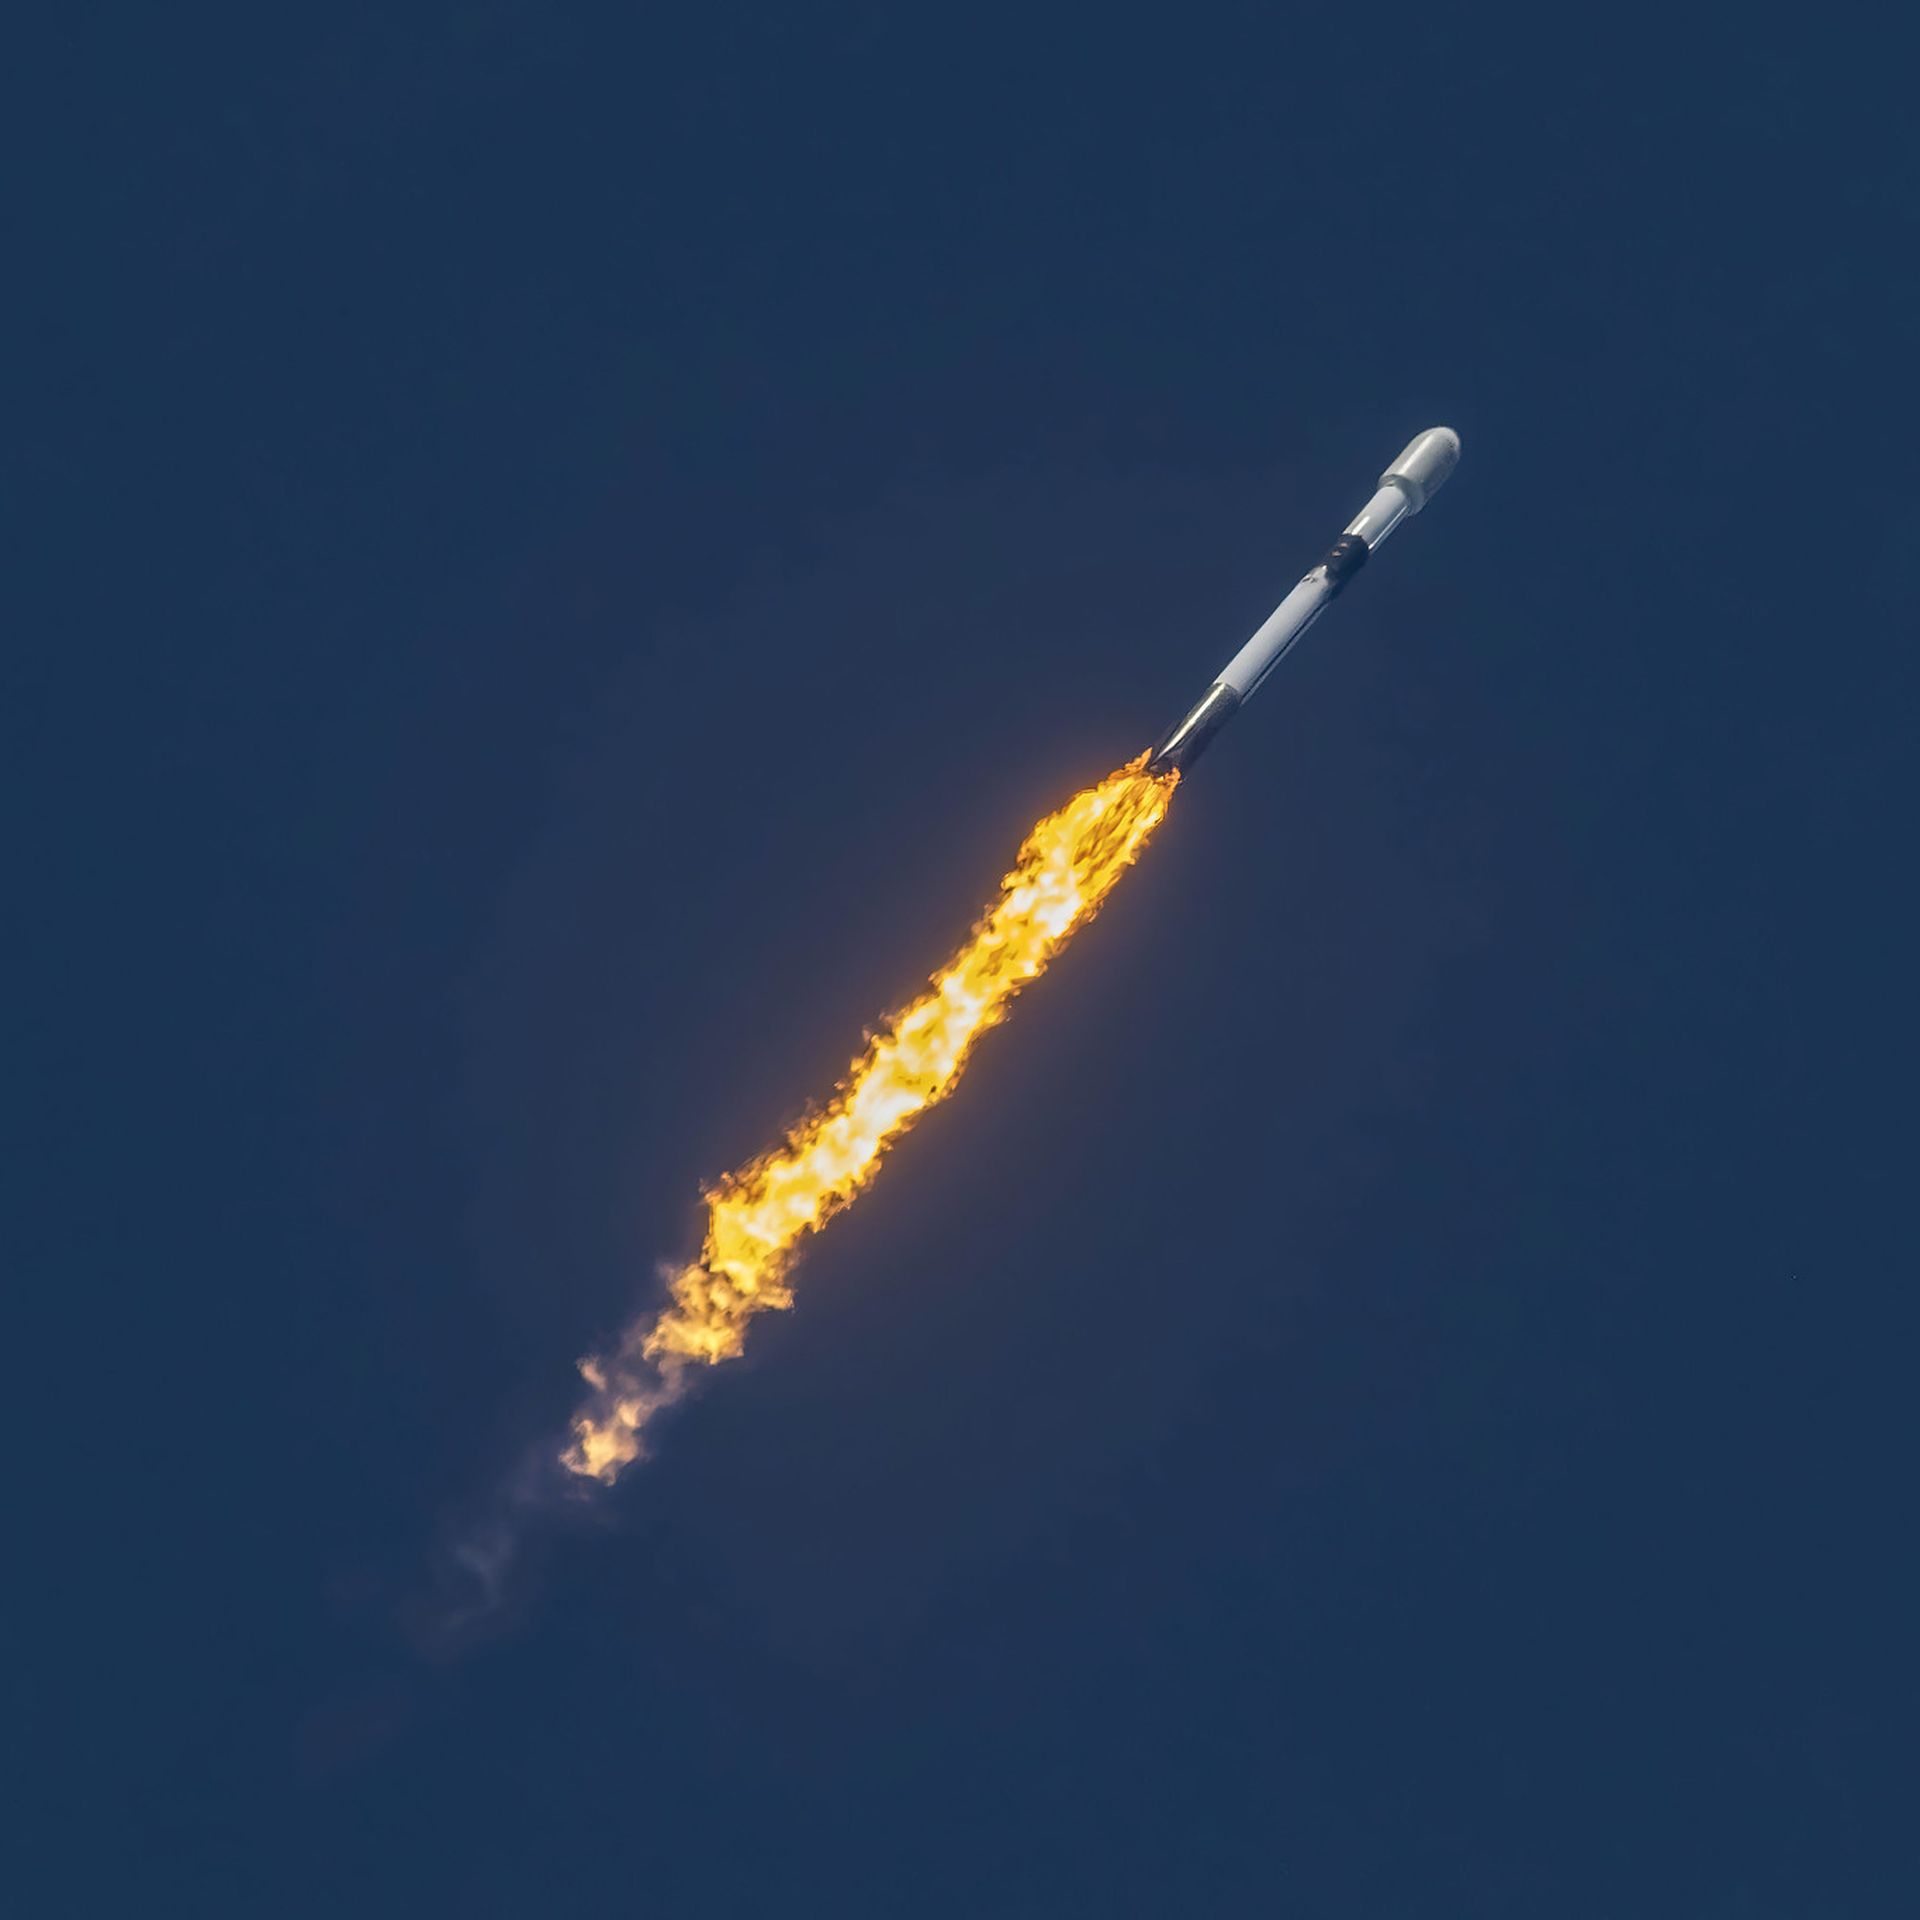 A Falcon 9 rocket carrying Starlink satellites to orbit